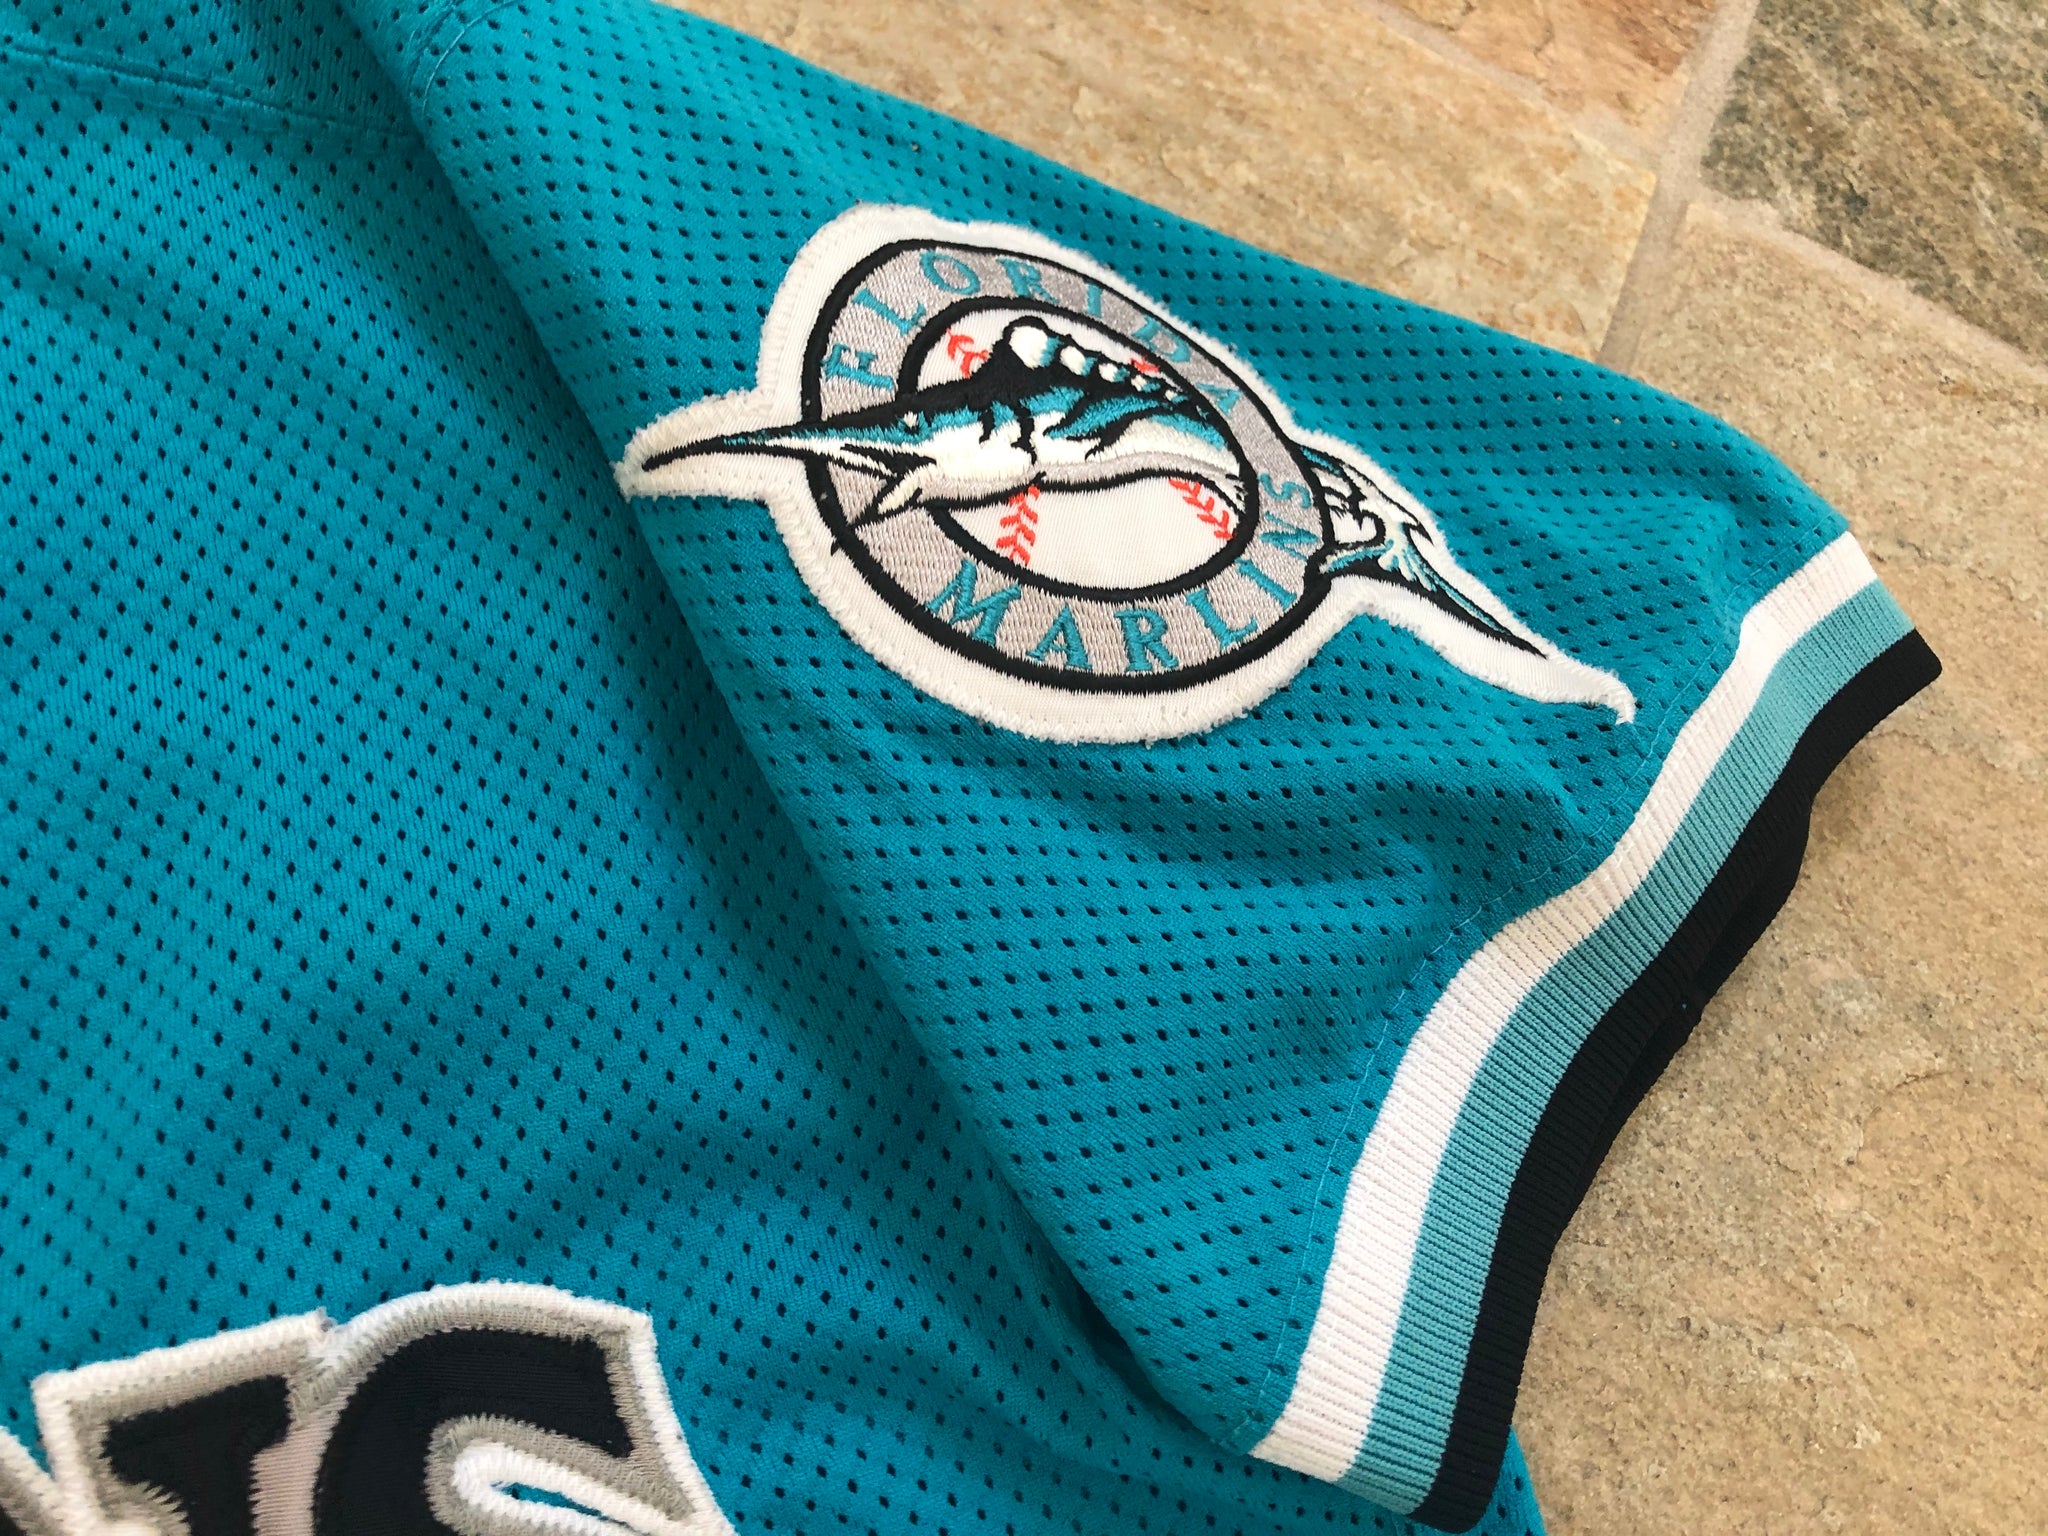 BNWOT Vintage 90s Florida Marlins Authentic Russell Athletic -  UK